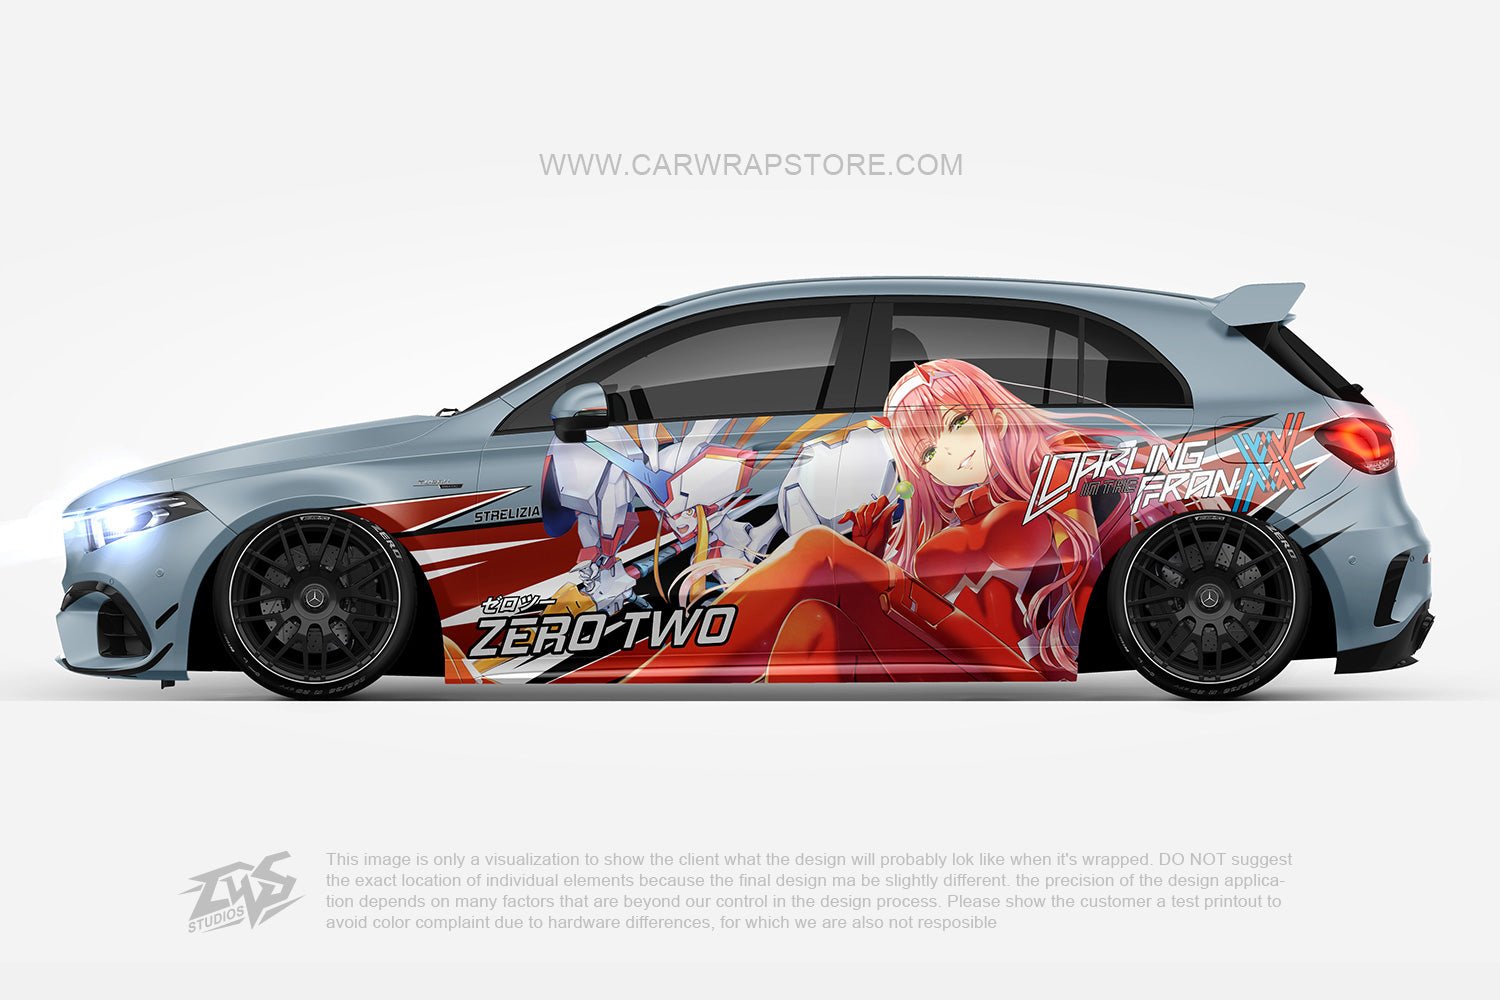 Zero Two DARLING in the FRANXX【002-09】 - Car Wrap Store